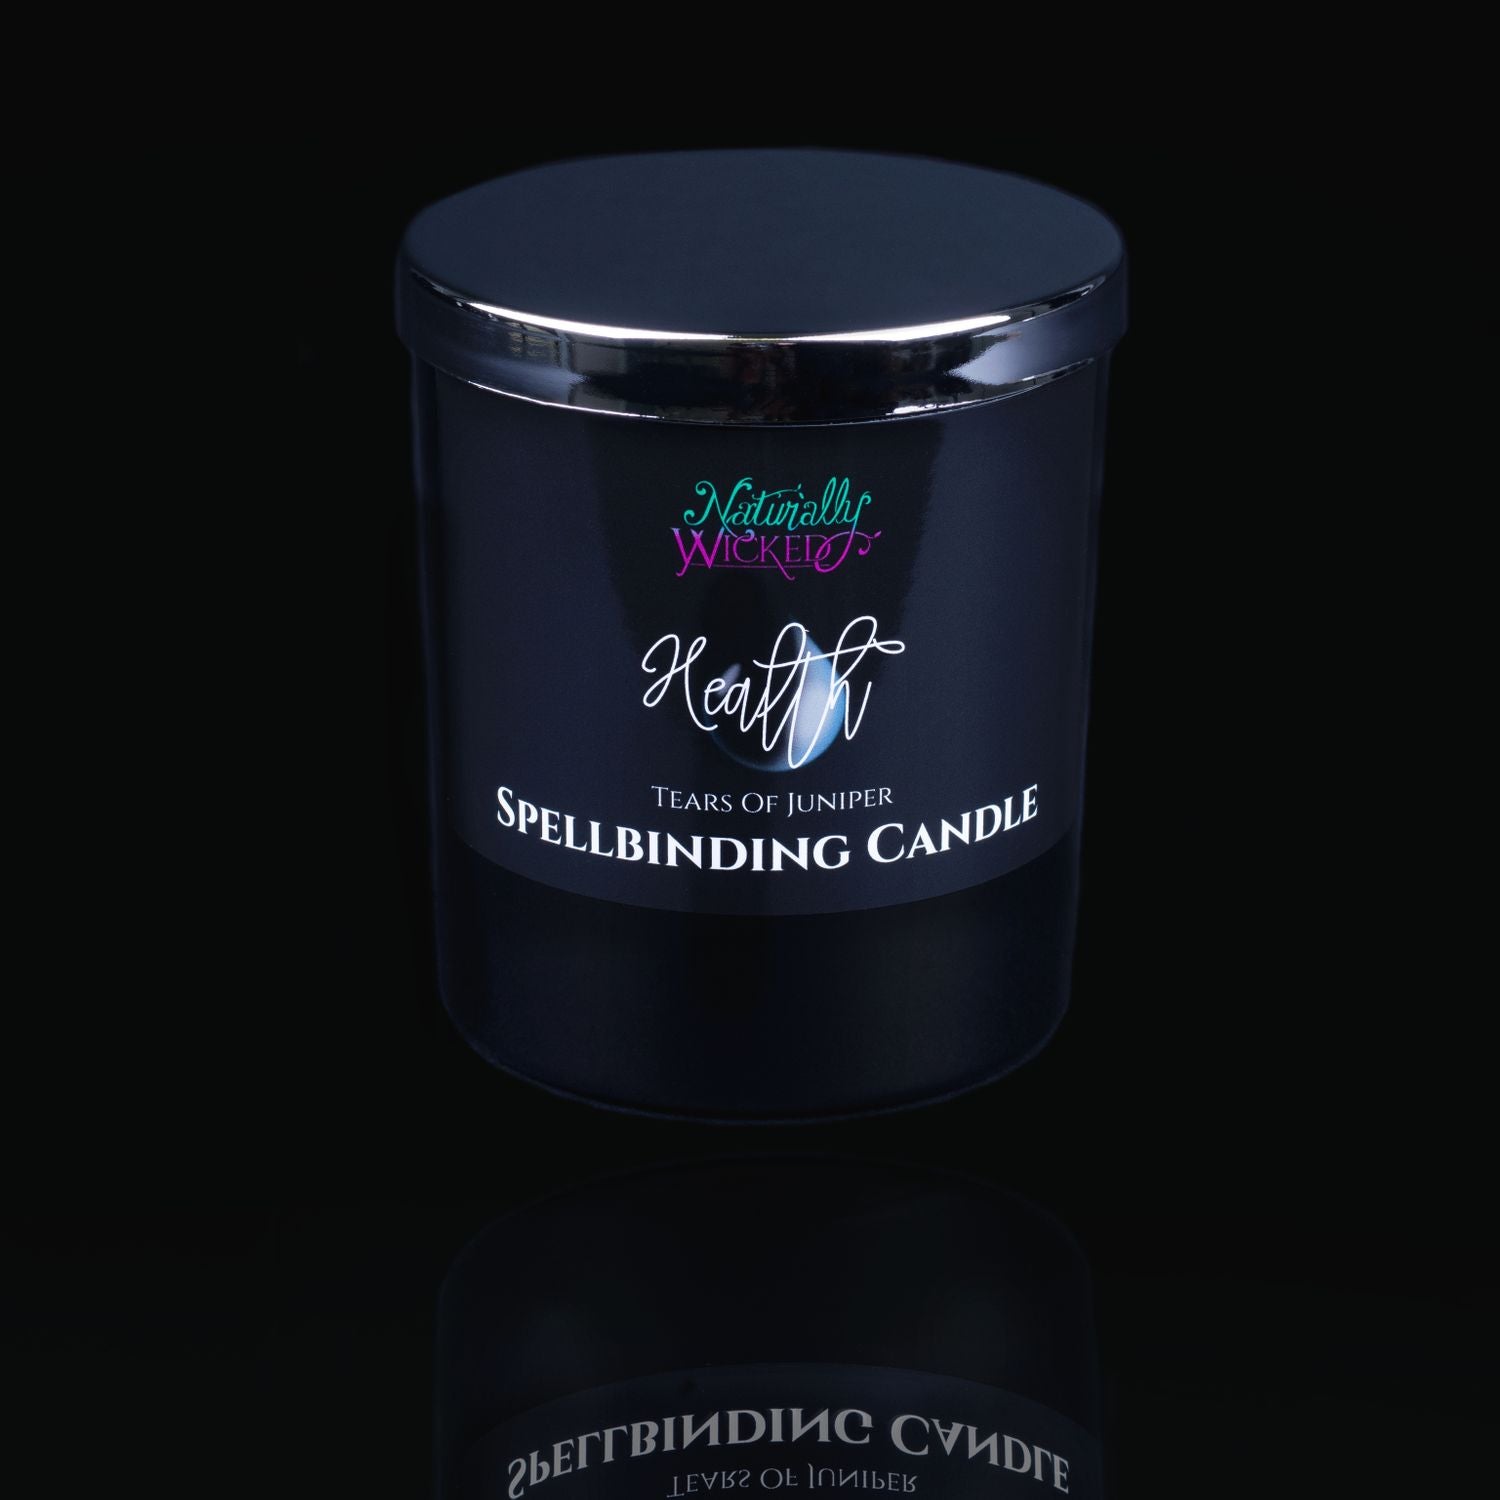 Naturally Wicked Spellbinding Health Spell Candle With Mirror Finished Exquisite Lid In Place. Featuring A Black Gloss Label And A Blue Water Tear Design. A Truly Classy Gift